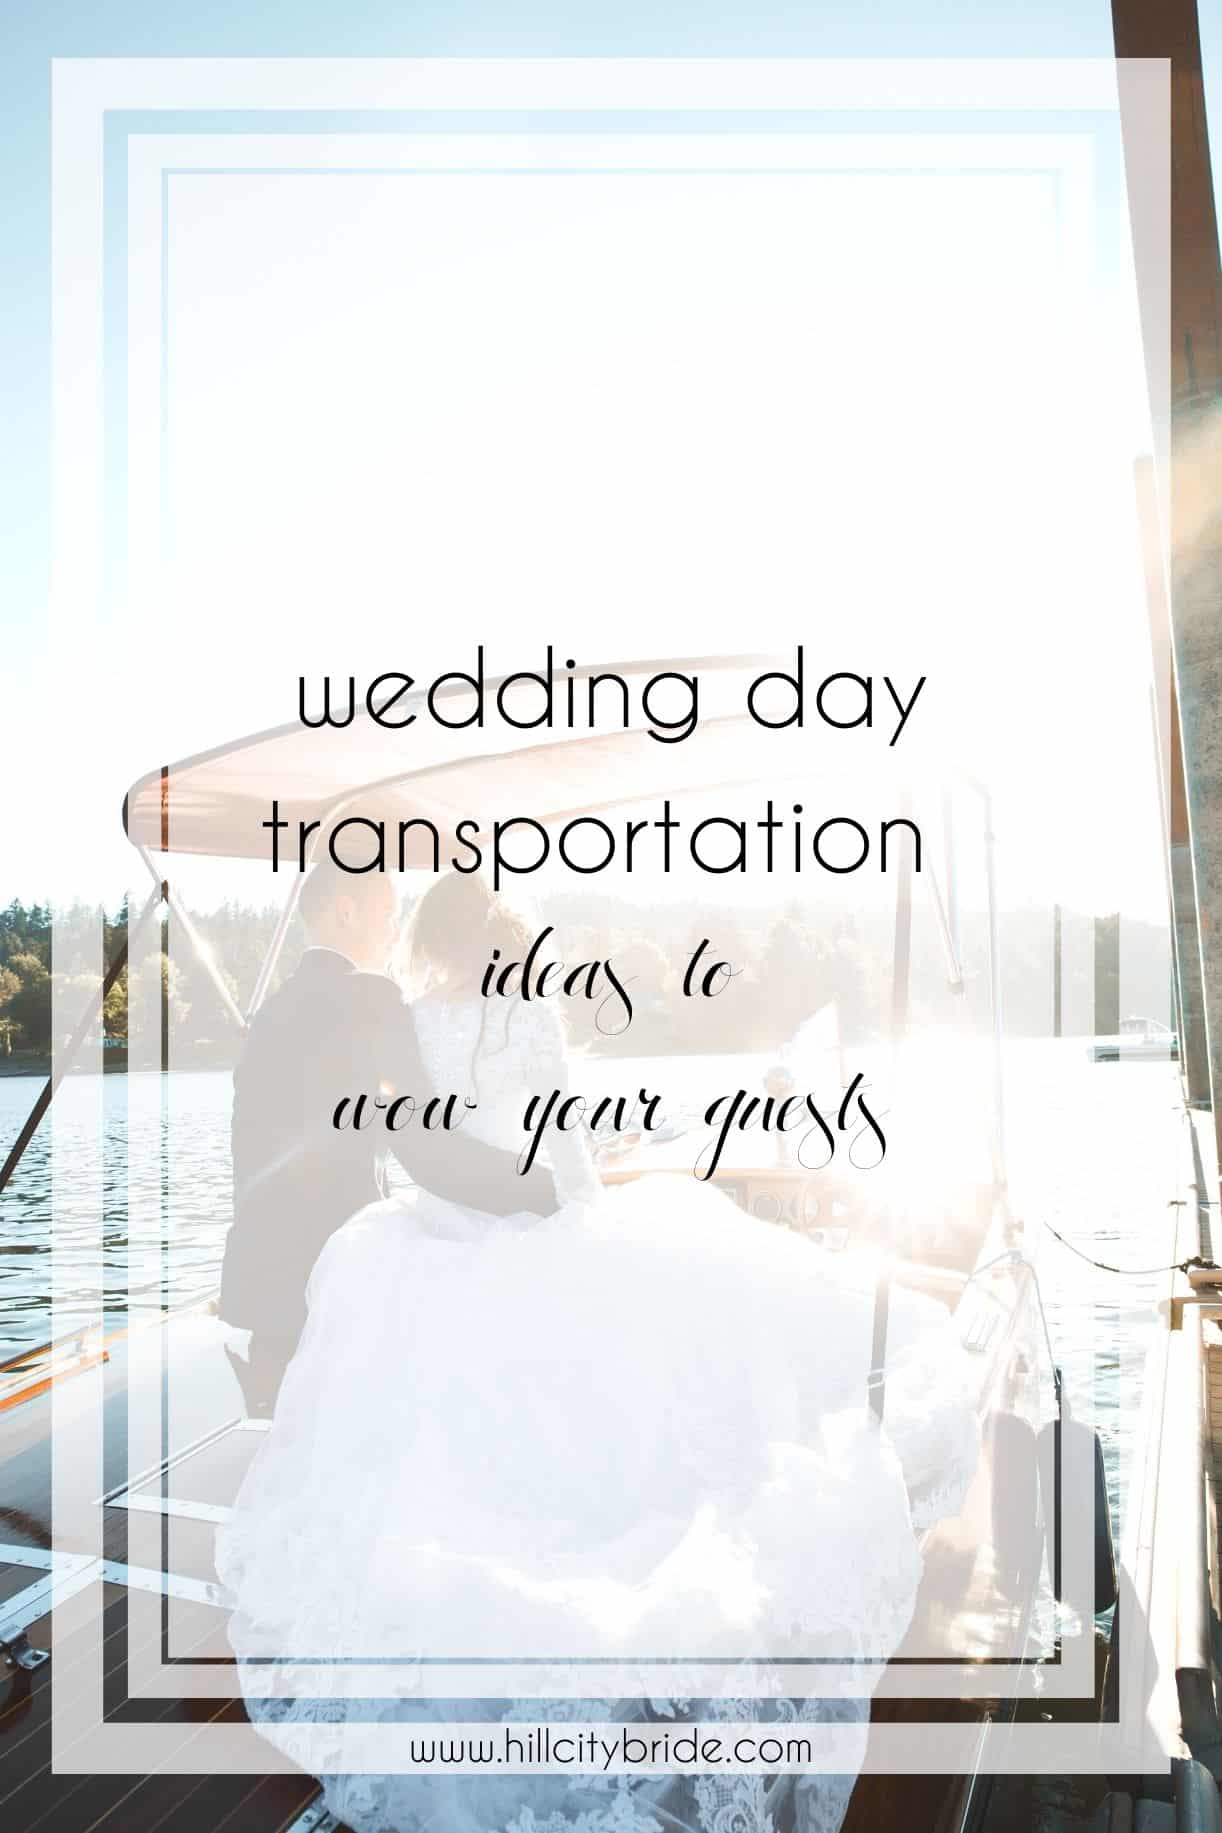 Wedding Day Transportation Ideas to Wow Your Guests